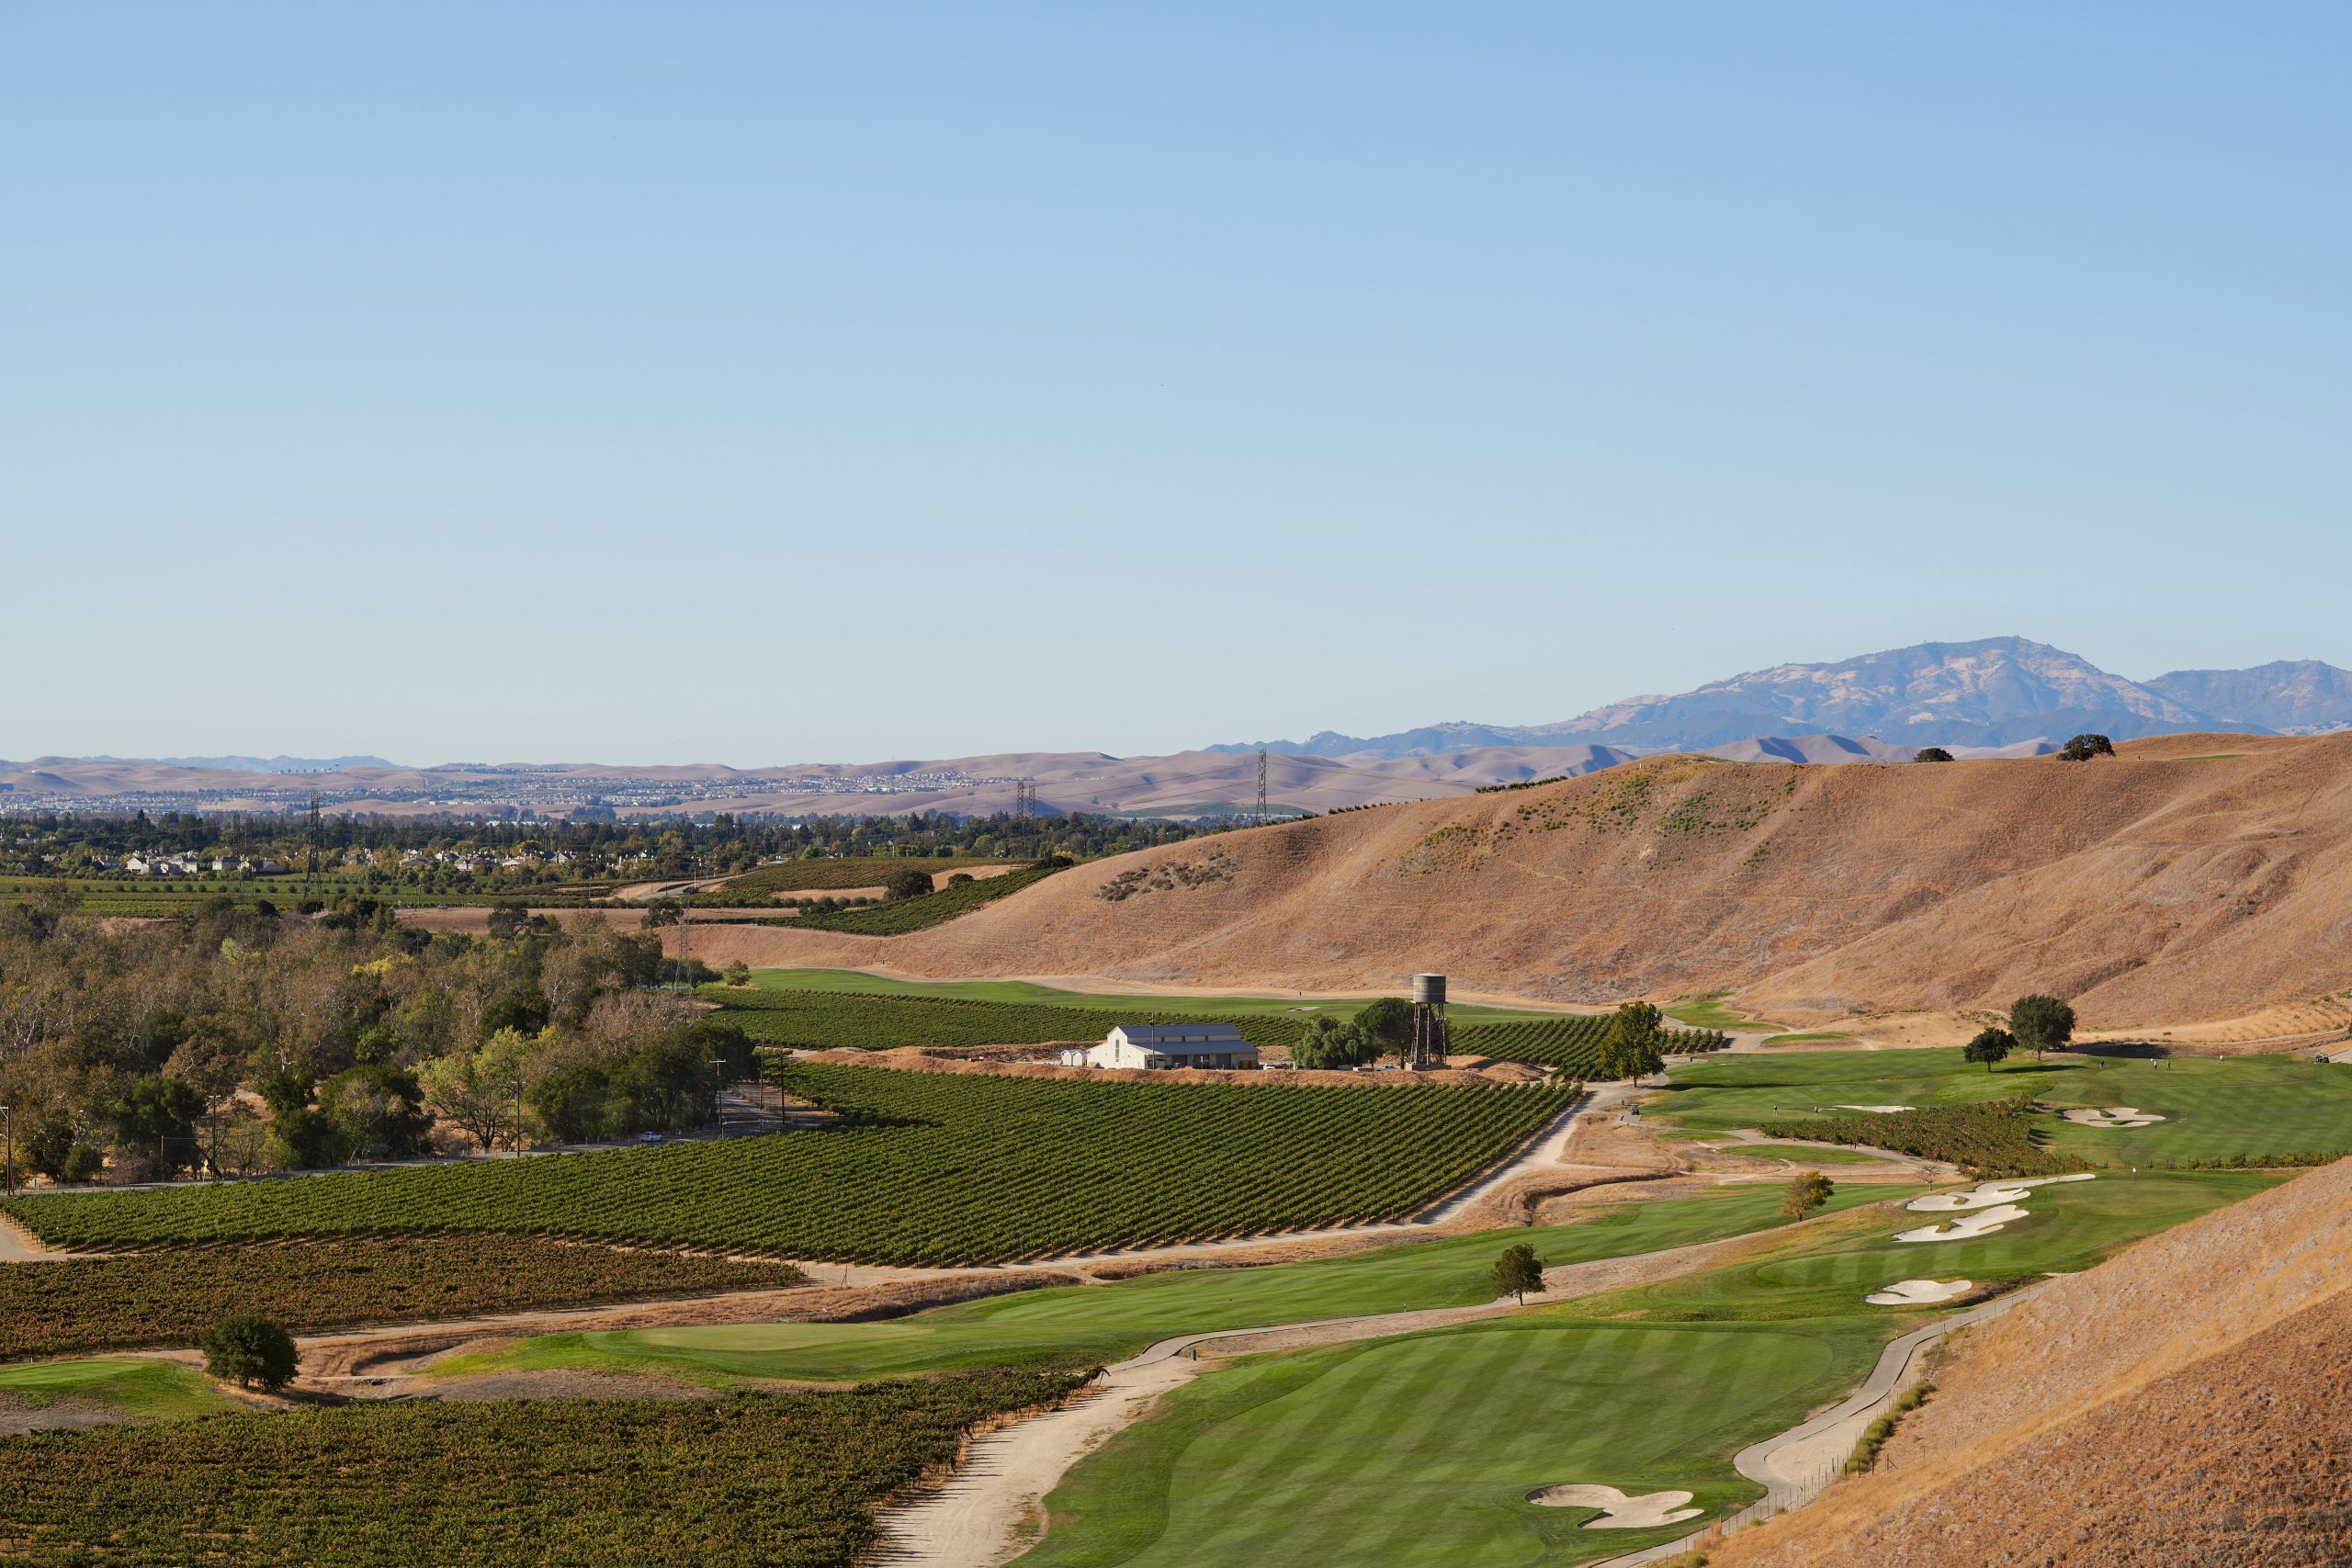 The Course at Wente Vineyards